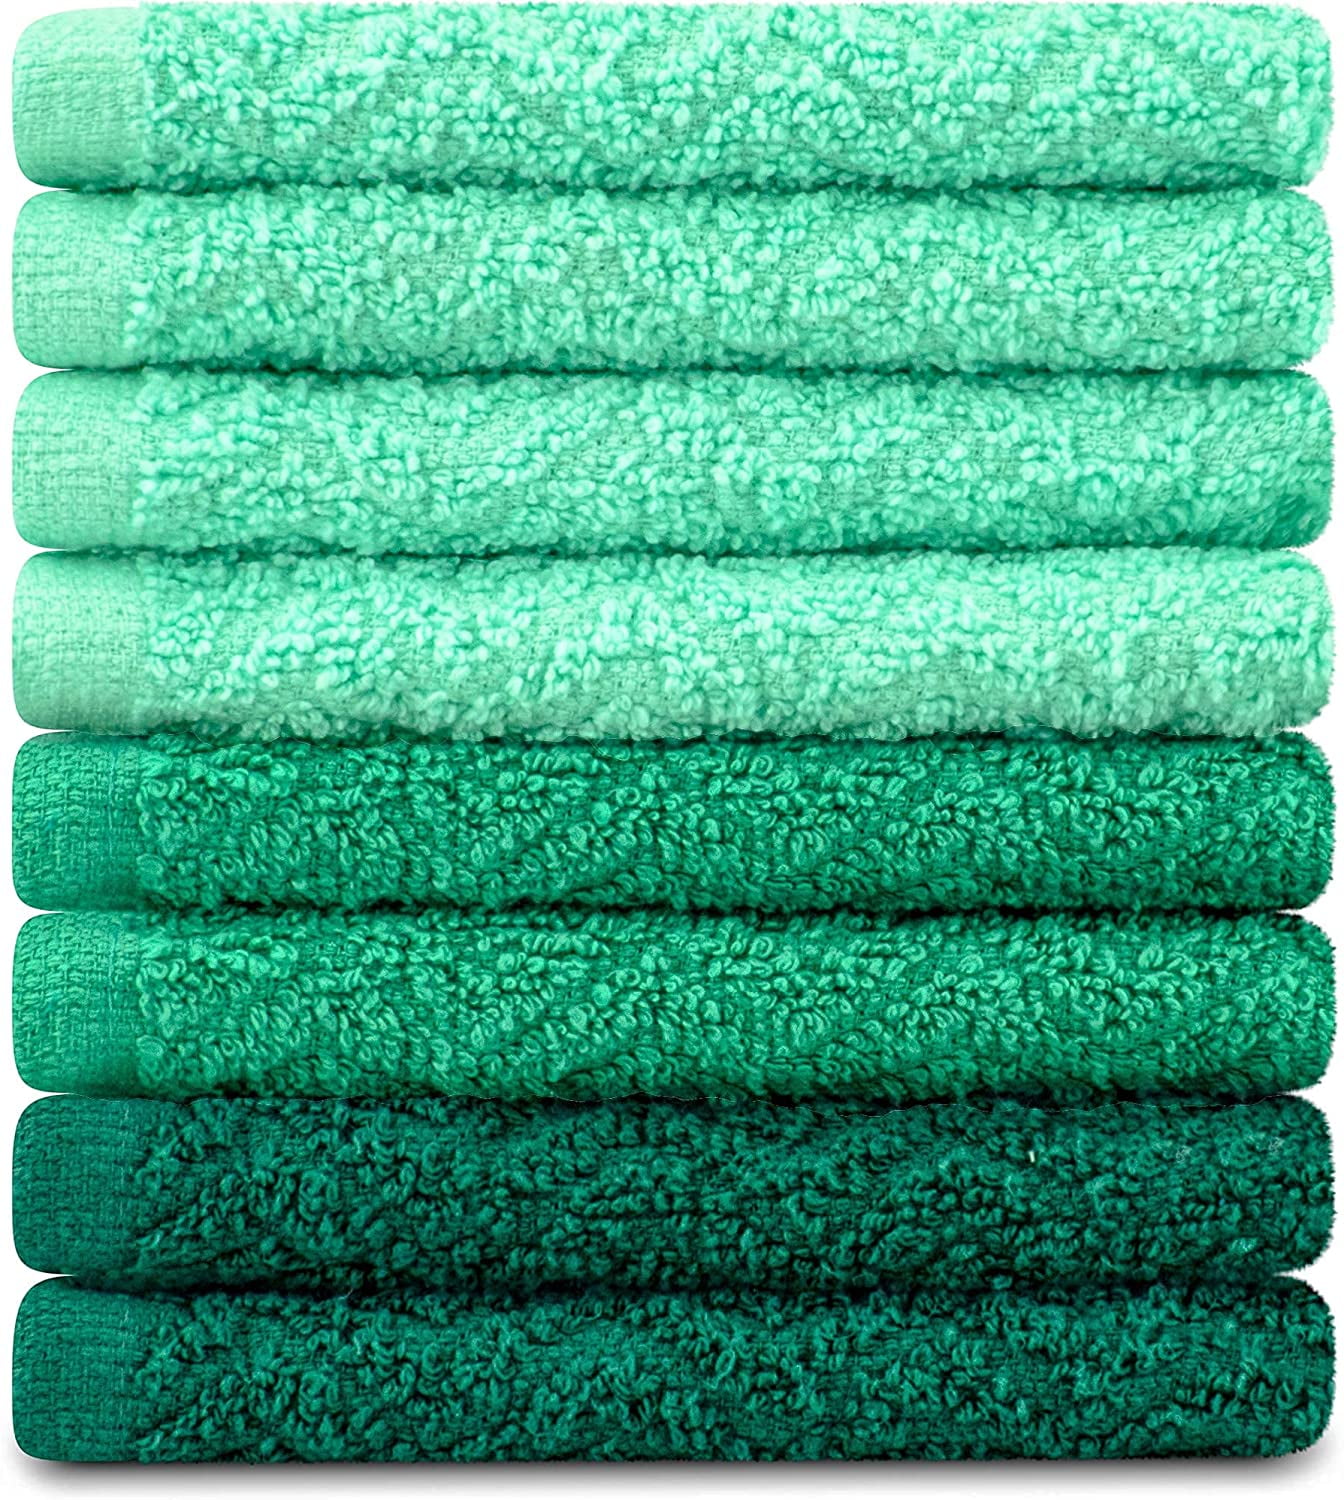  XLNT Green Kitchen Towels (9 Pack) - 100% Cotton Dish Towels, Durable, Ultra Absorbent Dishcloths Sets of Hand Towels/Tea Towels for  Everyday Scrubbing